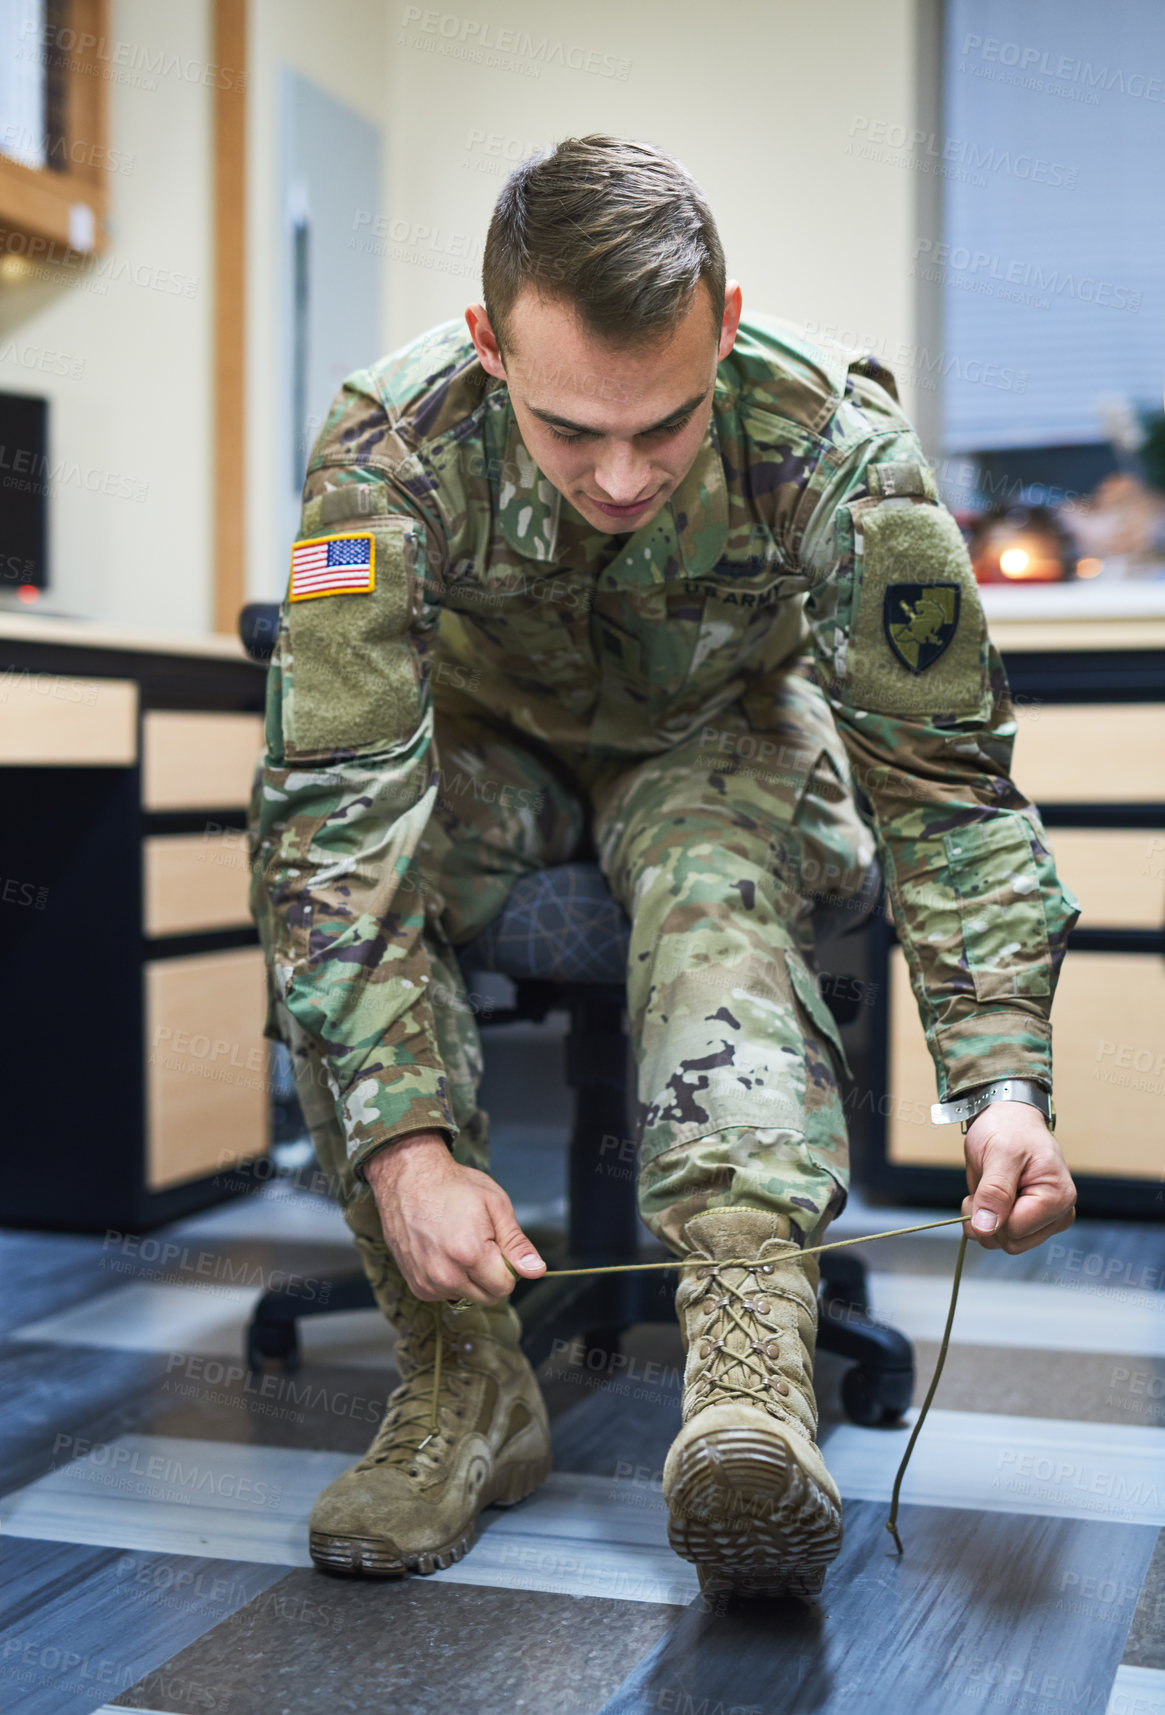 Buy stock photo Shot of a young soldier tying his boot shoelaces in the dorms of a military academy